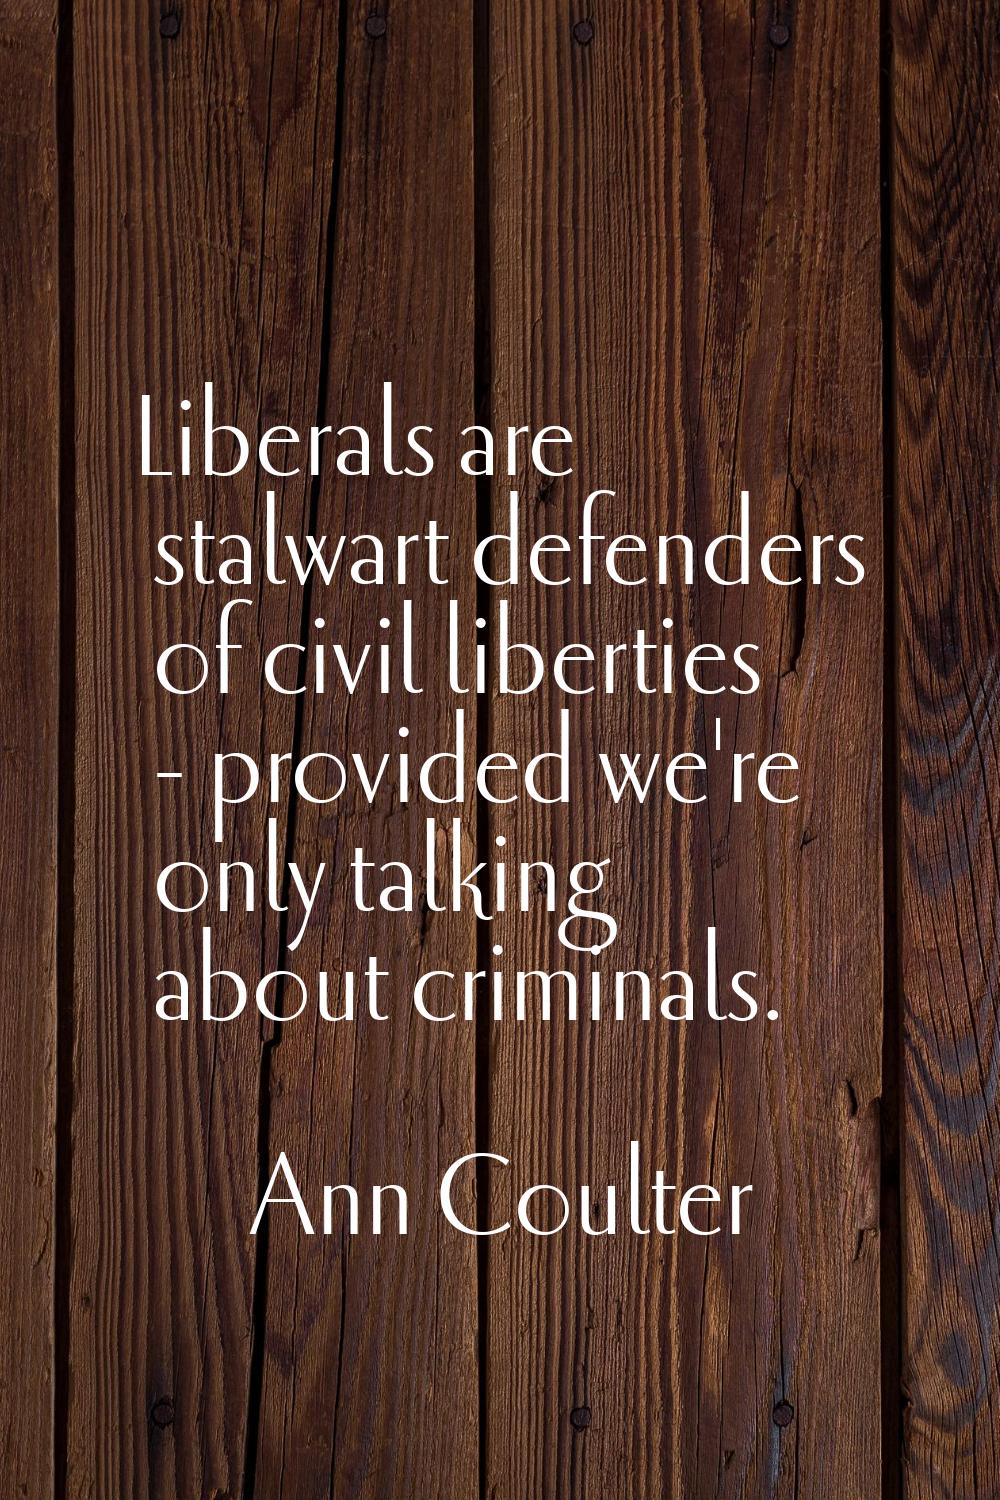 Liberals are stalwart defenders of civil liberties - provided we're only talking about criminals.